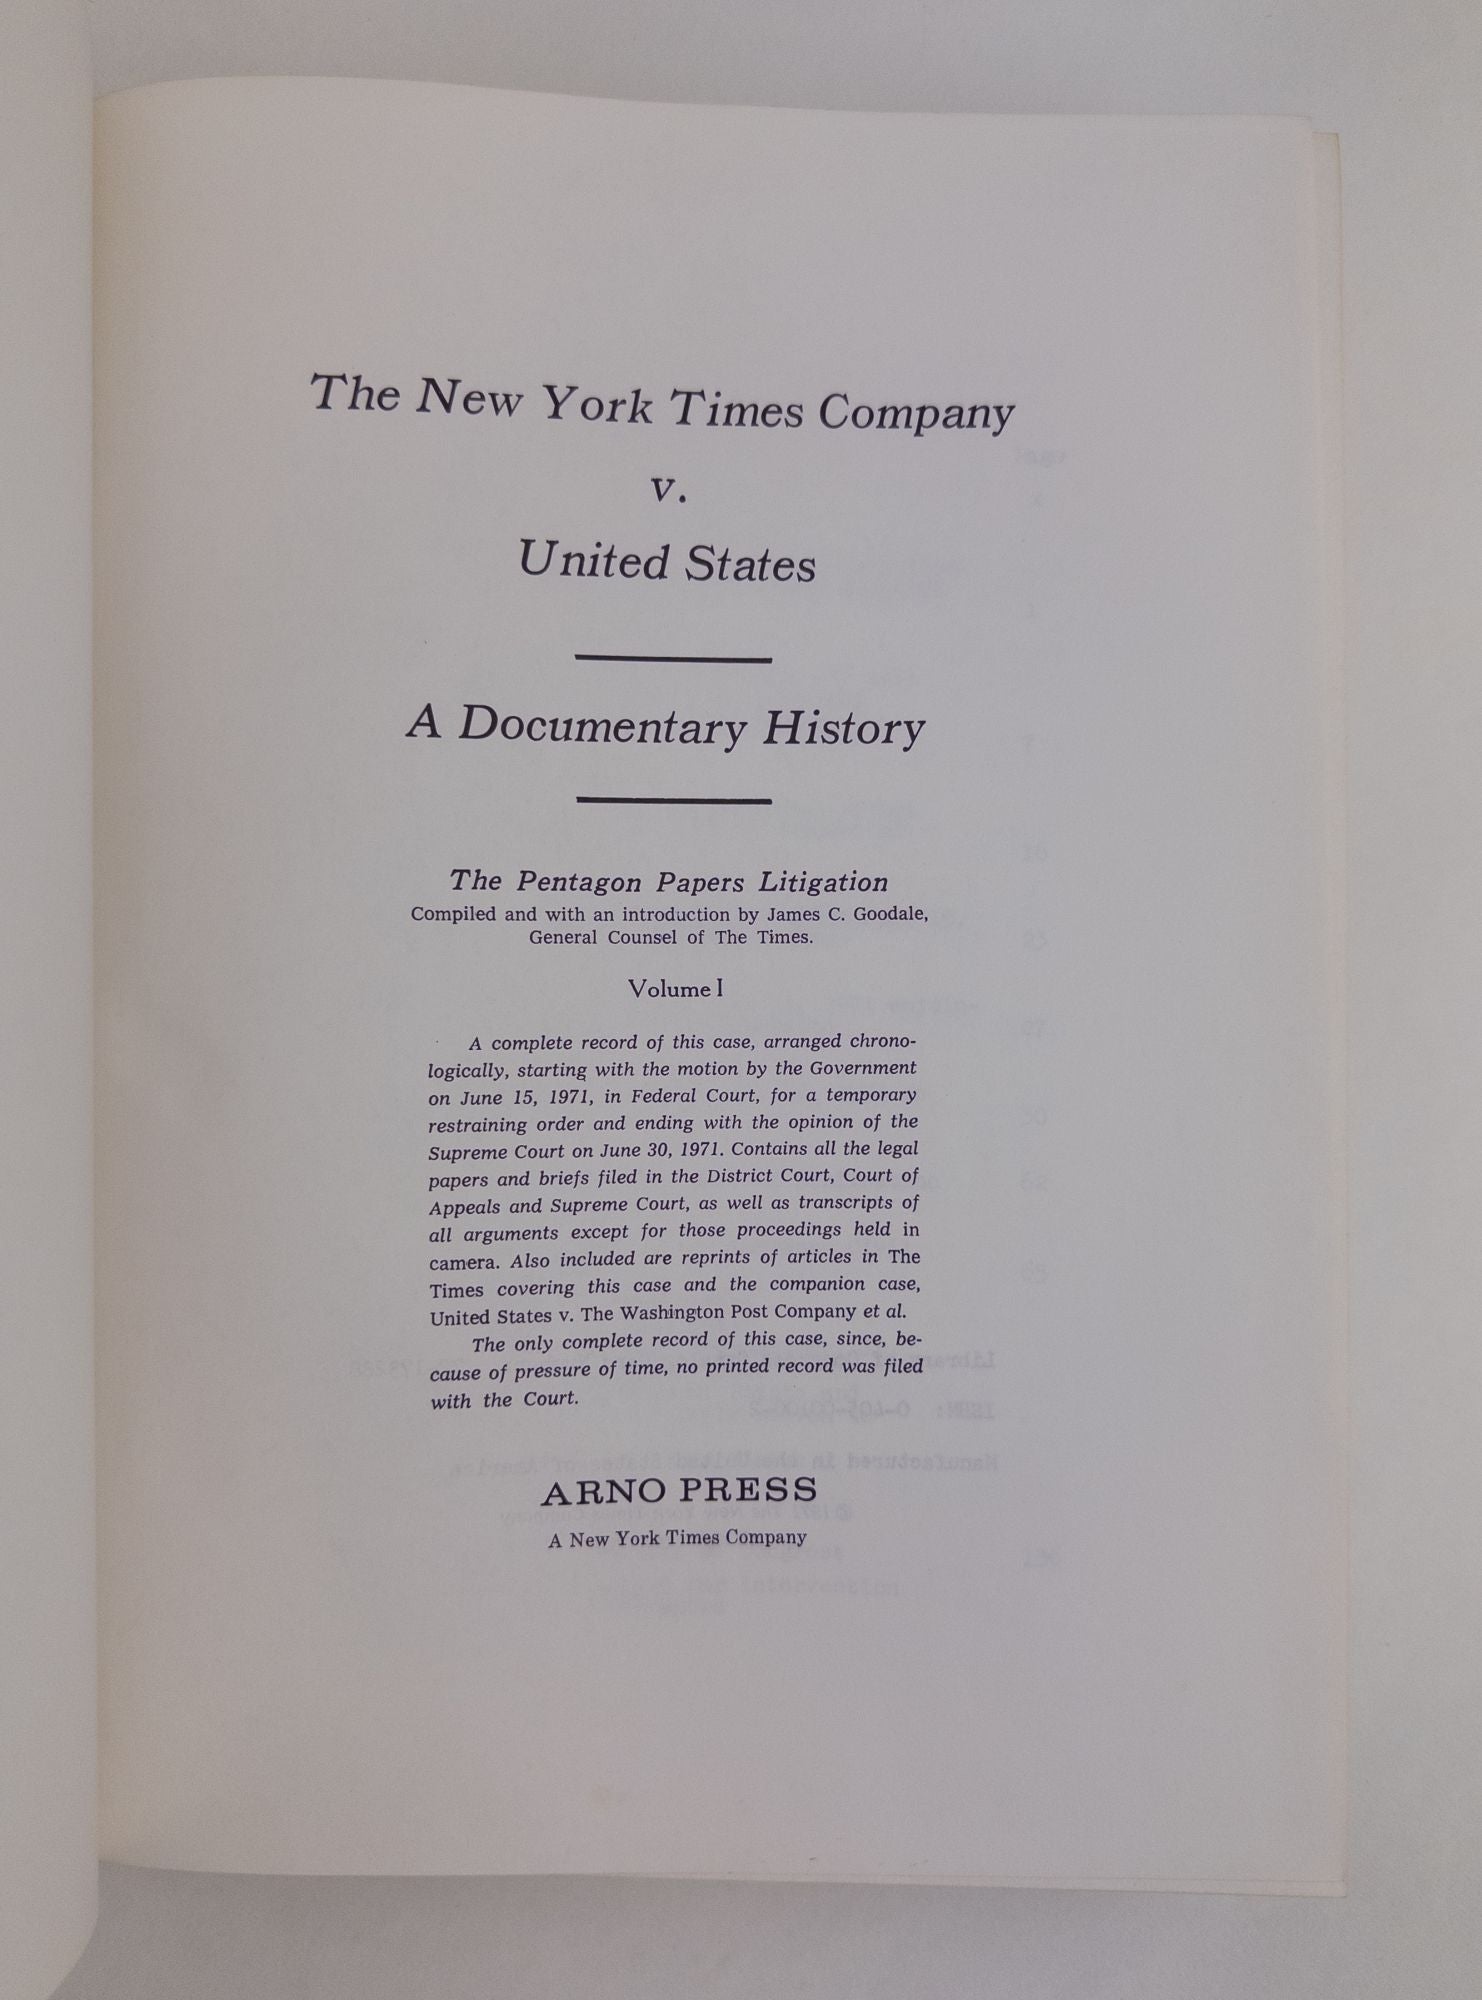 Product Image for THE NEW YORK TIMES COMPANY V. UNITED STATES. A DOCUMENTARY HISTORY. THE PENTAGON PAPERS LITIGATION [Two volumes]